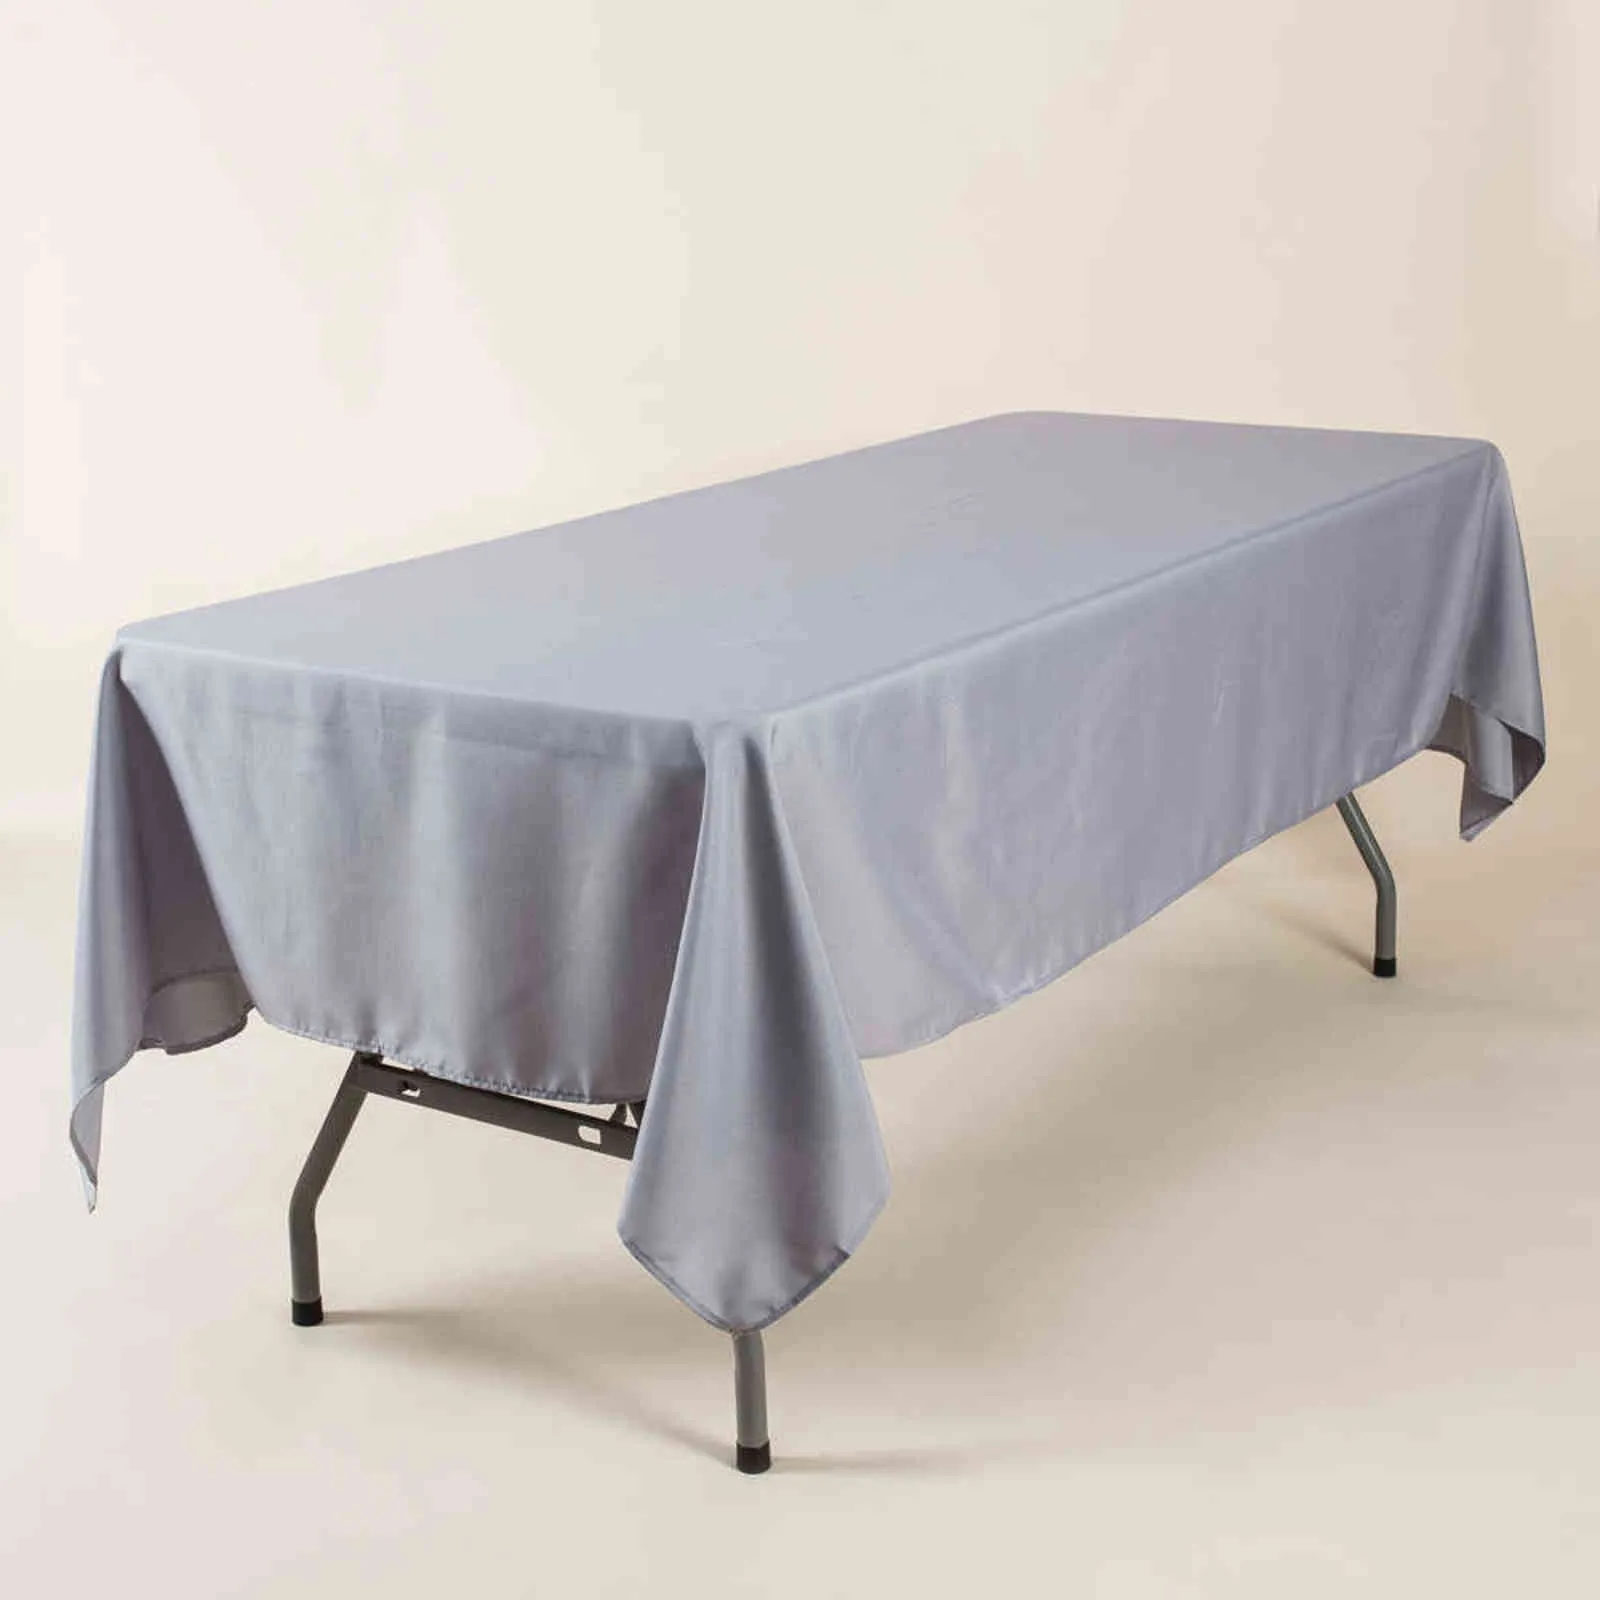 YRYIE Polyester Fabric White Rectangular Tablecloth Navy Blue Plain Table Cover For Weddings Event el Banquet 211103